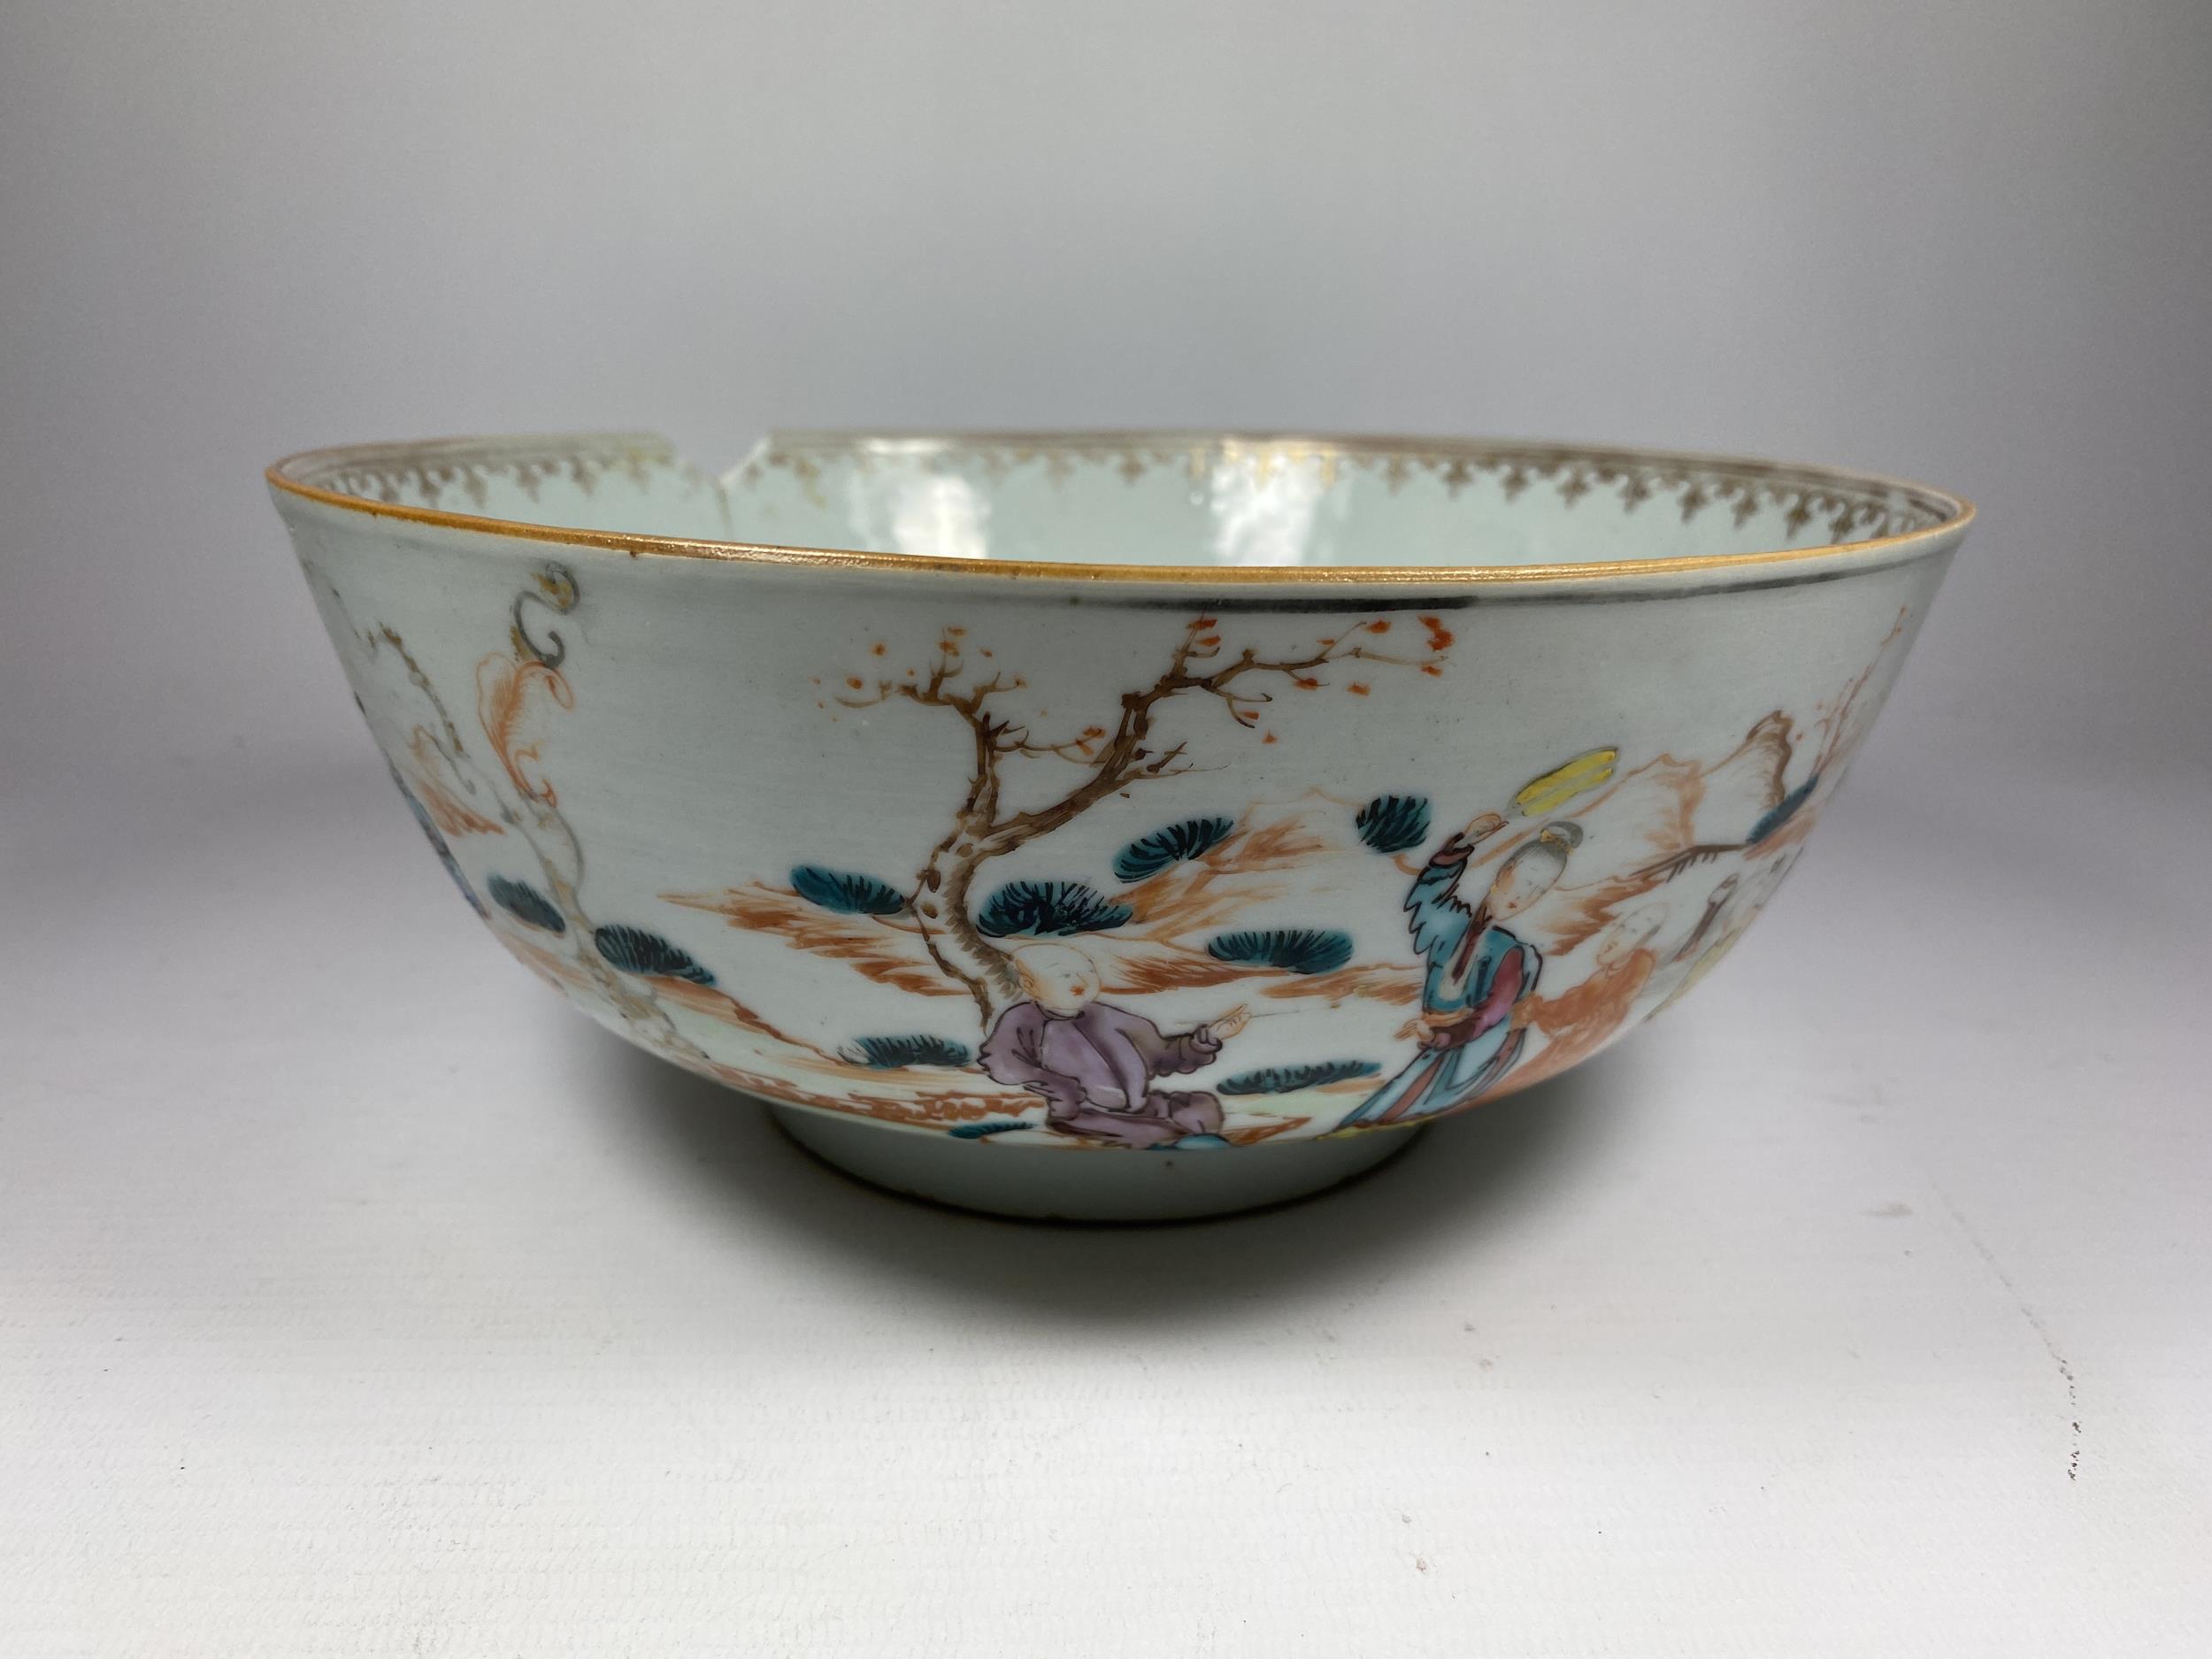 A LATE 18TH CENTURY CHINESE PORCELAIN PUNCH / FRUIT BOWL DEPICTING FIGURES, DIAMETER 23CM (A/F)